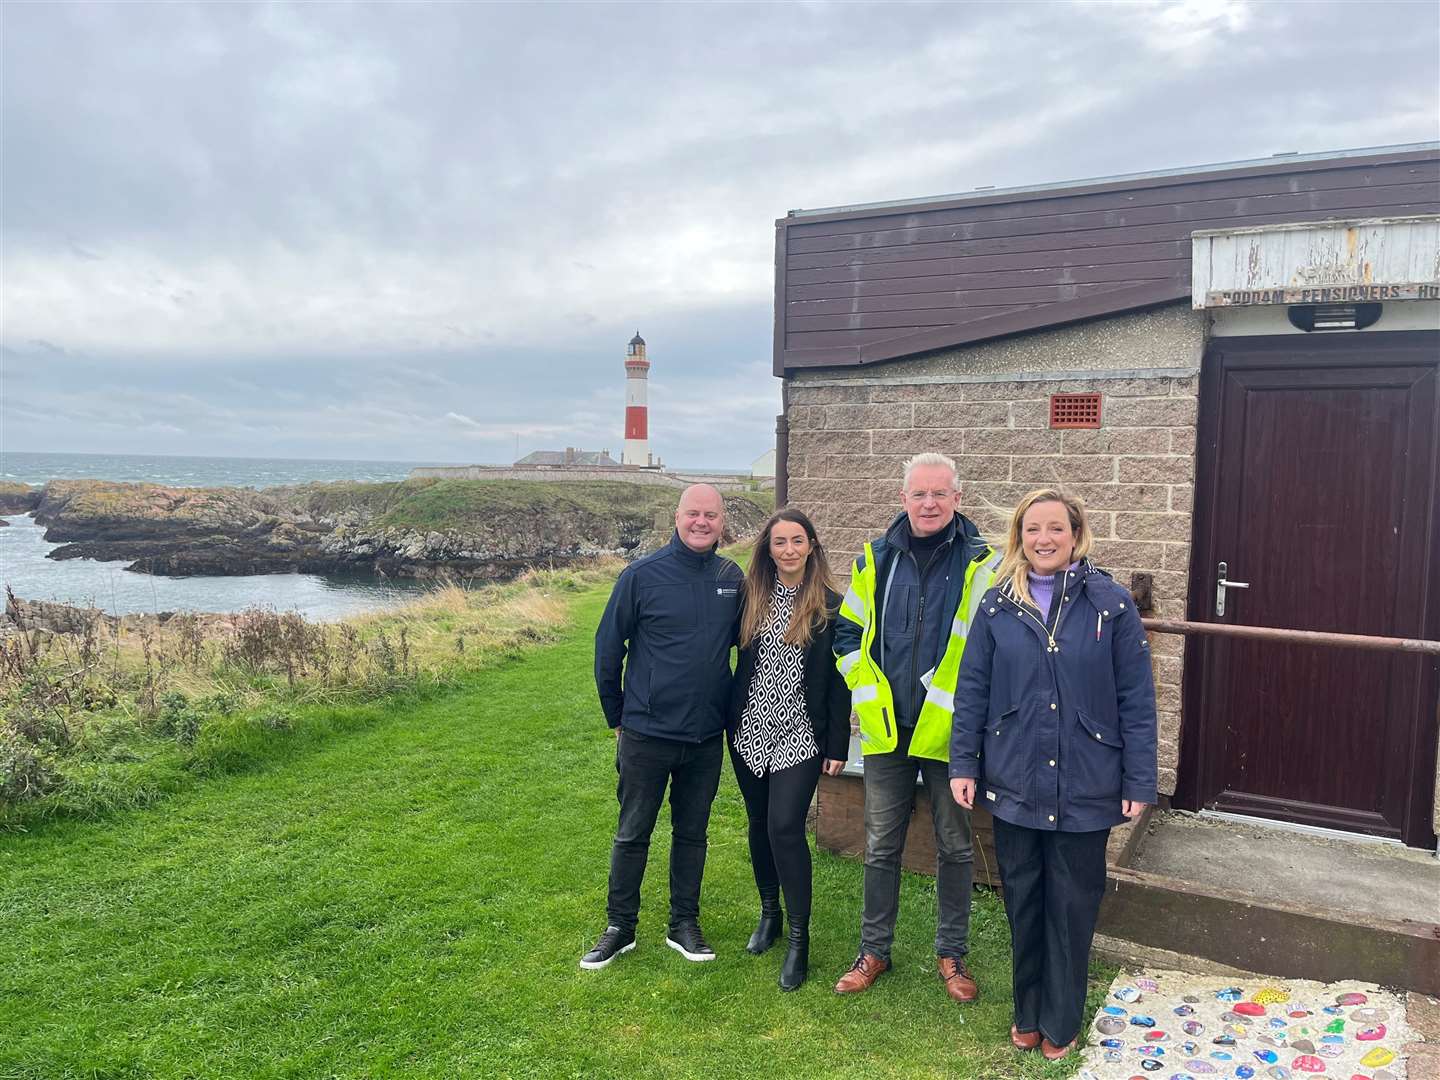 Members of the Peterhead Substation team met with Fiona James from Boddam Community Hub